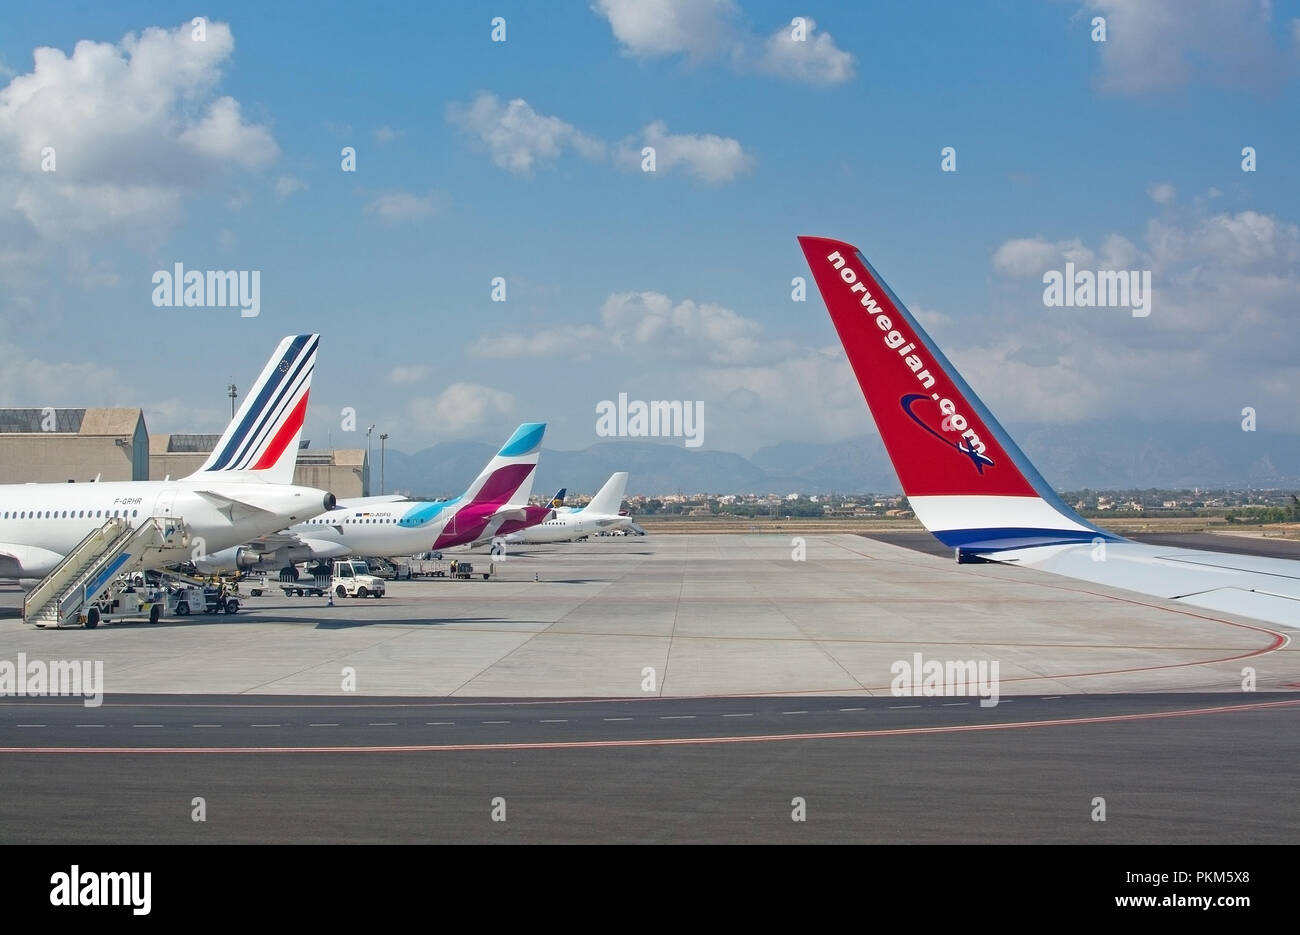 PALMA DE MALLORCA, SPAIN - SEPTEMBER 6, 2018: Airplanes from various companies on the tarmac outside gates on a sunny day on September 6, 2018 in Mall Stock Photo